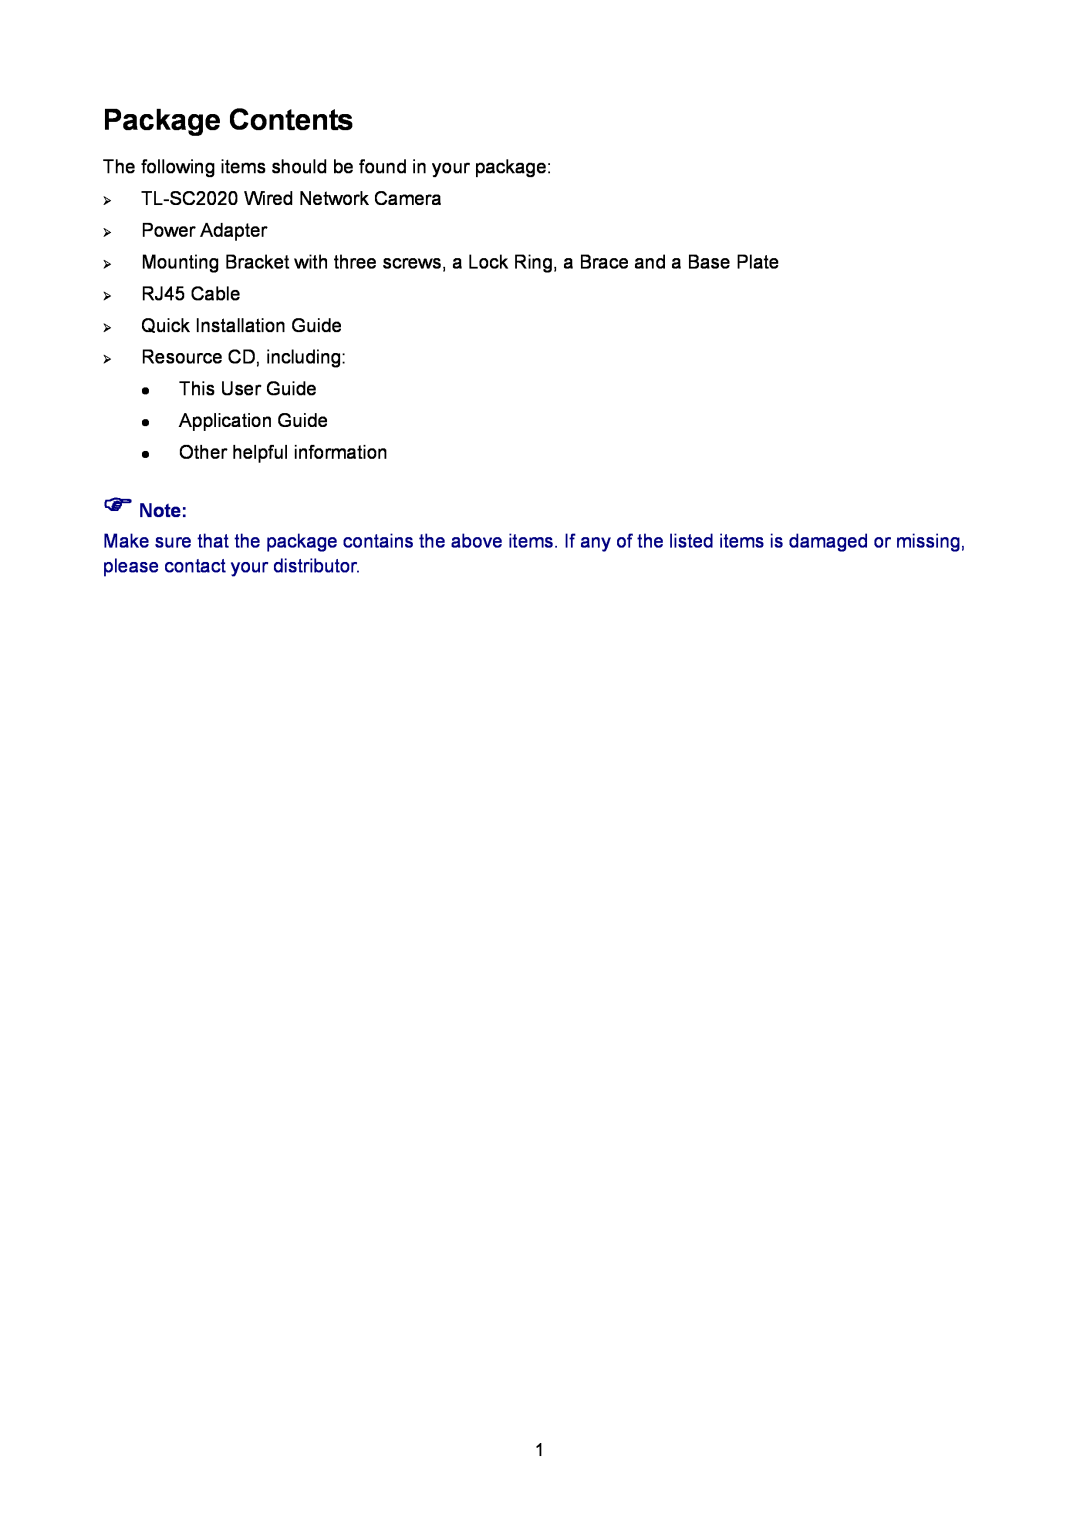 TP-Link TL-SC2020 manual Package Contents,  Note 